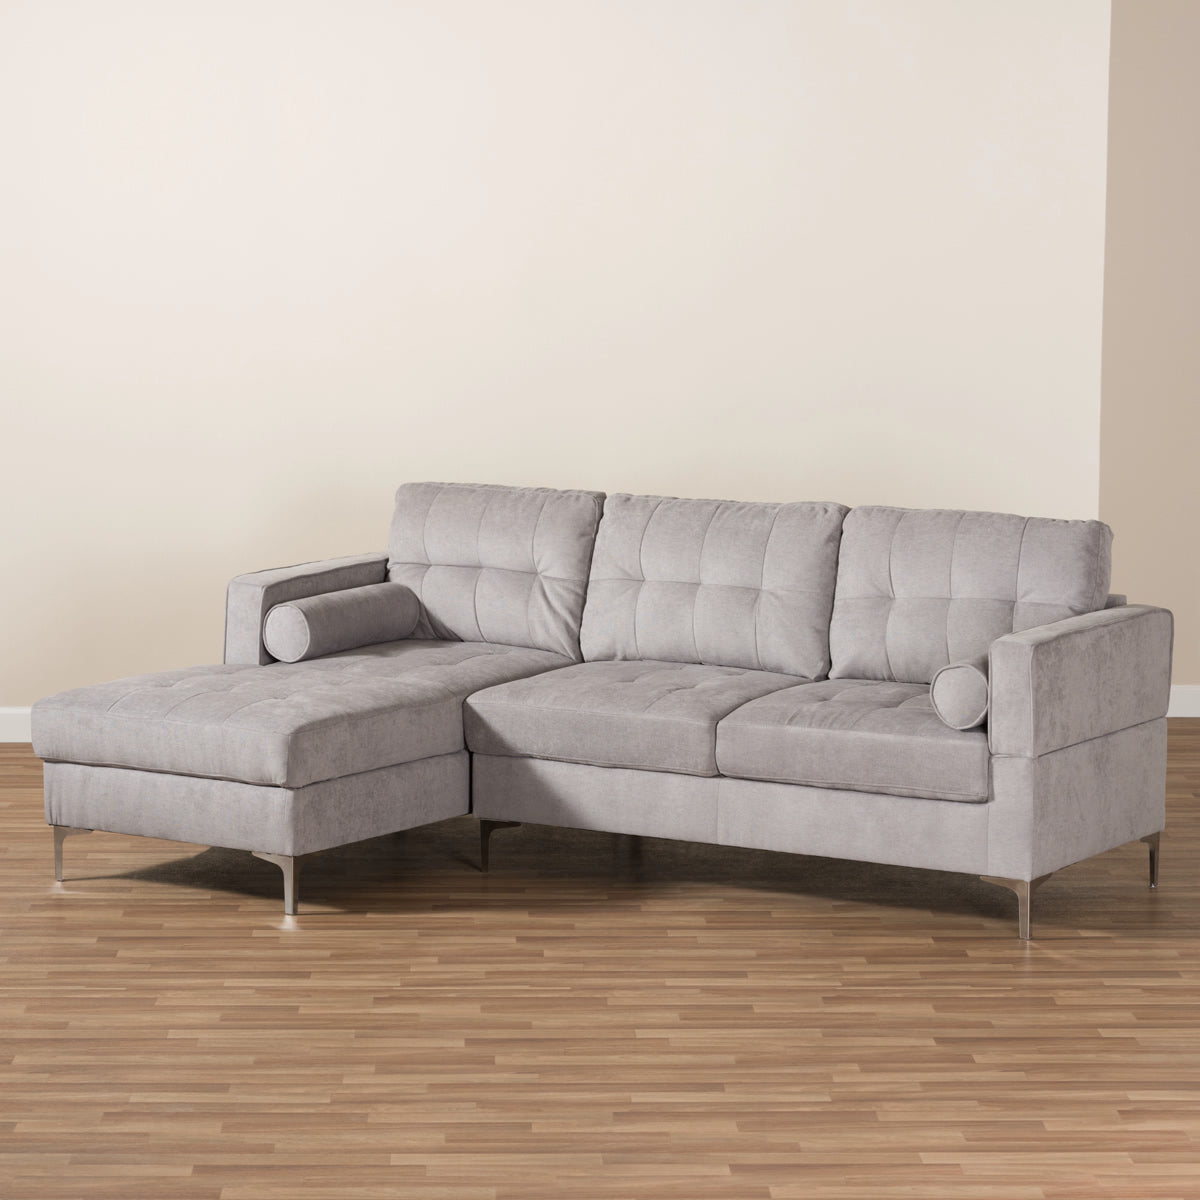 Baxton Studio Mireille Modern and Contemporary Light Grey Fabric Upholstered Sectional Sofa Baxton Studio-sofas-Minimal And Modern - 5